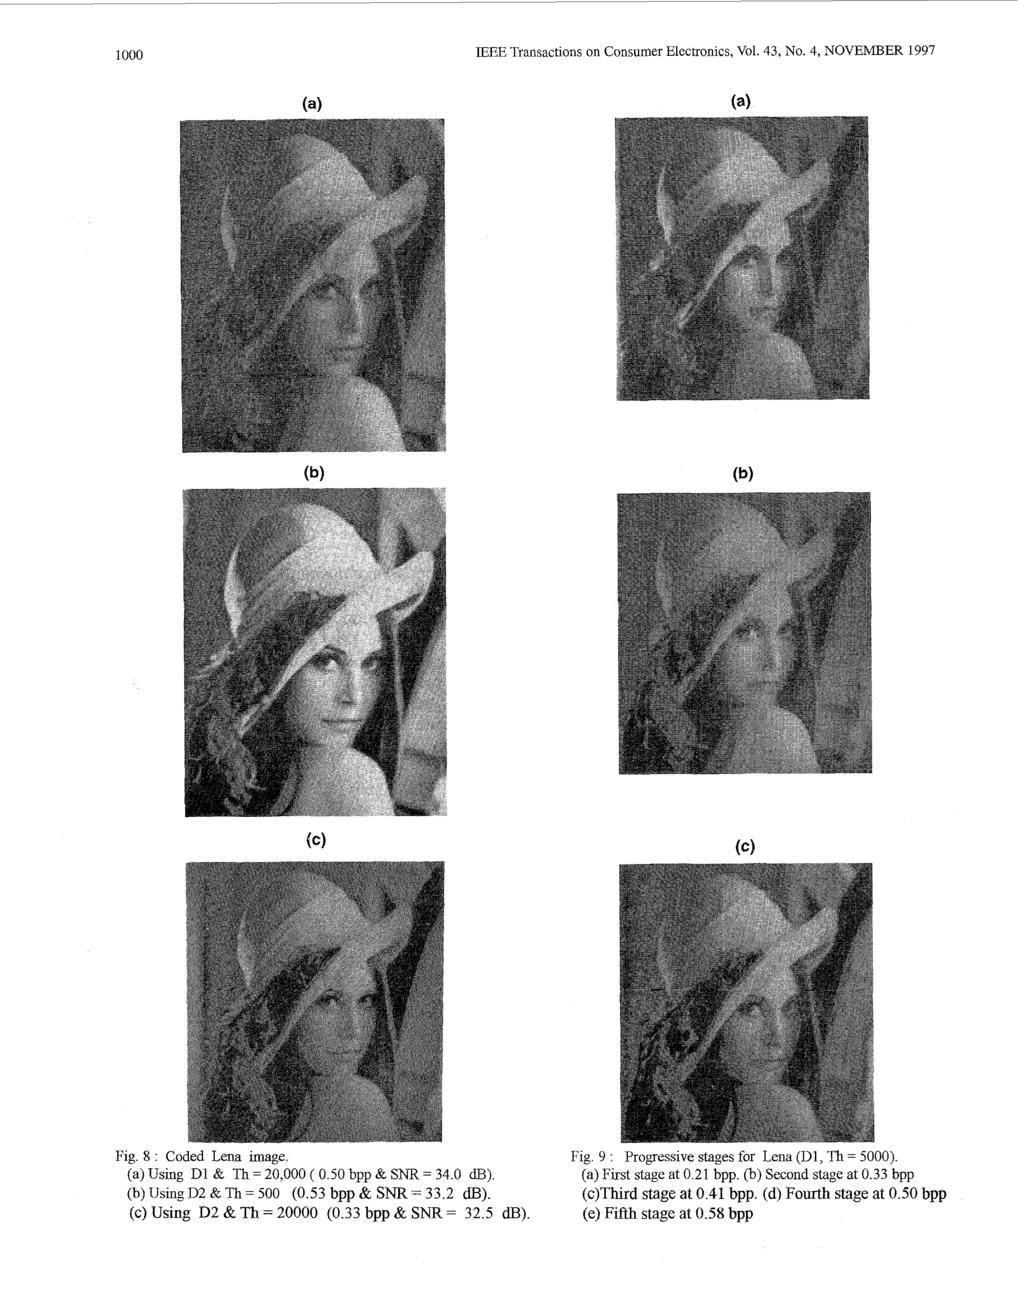 1000 EEE Transactions on Consumer Electronics, Vol. 43, No. 4, NOVEMBER 1997 Fig. 8 : Coded Lena image. [a) Using D1 & Th = 20,000 ( 0.50 bpp & SNR = 34.0 a). (b) Using D2 & Th = 500 (0.